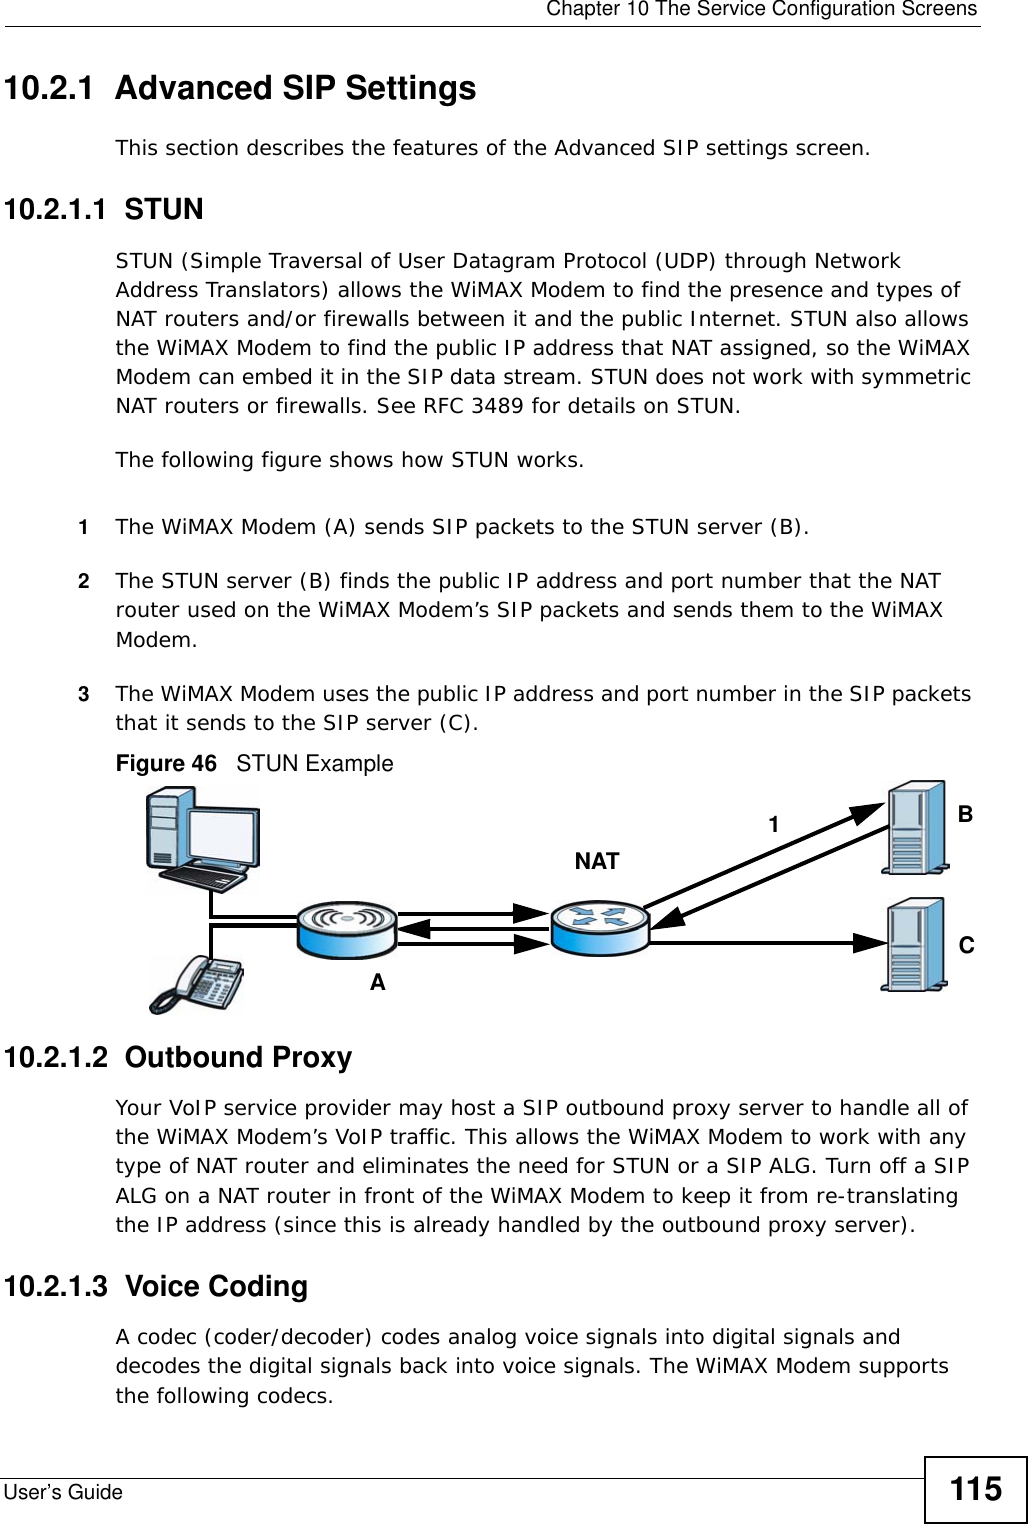  Chapter 10 The Service Configuration ScreensUser’s Guide 11510.2.1  Advanced SIP SettingsThis section describes the features of the Advanced SIP settings screen.10.2.1.1  STUNSTUN (Simple Traversal of User Datagram Protocol (UDP) through Network Address Translators) allows the WiMAX Modem to find the presence and types of NAT routers and/or firewalls between it and the public Internet. STUN also allows the WiMAX Modem to find the public IP address that NAT assigned, so the WiMAX Modem can embed it in the SIP data stream. STUN does not work with symmetric NAT routers or firewalls. See RFC 3489 for details on STUN.The following figure shows how STUN works. 1The WiMAX Modem (A) sends SIP packets to the STUN server (B).2The STUN server (B) finds the public IP address and port number that the NAT router used on the WiMAX Modem’s SIP packets and sends them to the WiMAX Modem.3The WiMAX Modem uses the public IP address and port number in the SIP packets that it sends to the SIP server (C).Figure 46   STUN Example10.2.1.2  Outbound ProxyYour VoIP service provider may host a SIP outbound proxy server to handle all of the WiMAX Modem’s VoIP traffic. This allows the WiMAX Modem to work with any type of NAT router and eliminates the need for STUN or a SIP ALG. Turn off a SIP ALG on a NAT router in front of the WiMAX Modem to keep it from re-translating the IP address (since this is already handled by the outbound proxy server).10.2.1.3  Voice CodingA codec (coder/decoder) codes analog voice signals into digital signals and decodes the digital signals back into voice signals. The WiMAX Modem supports the following codecs.ABCNAT1